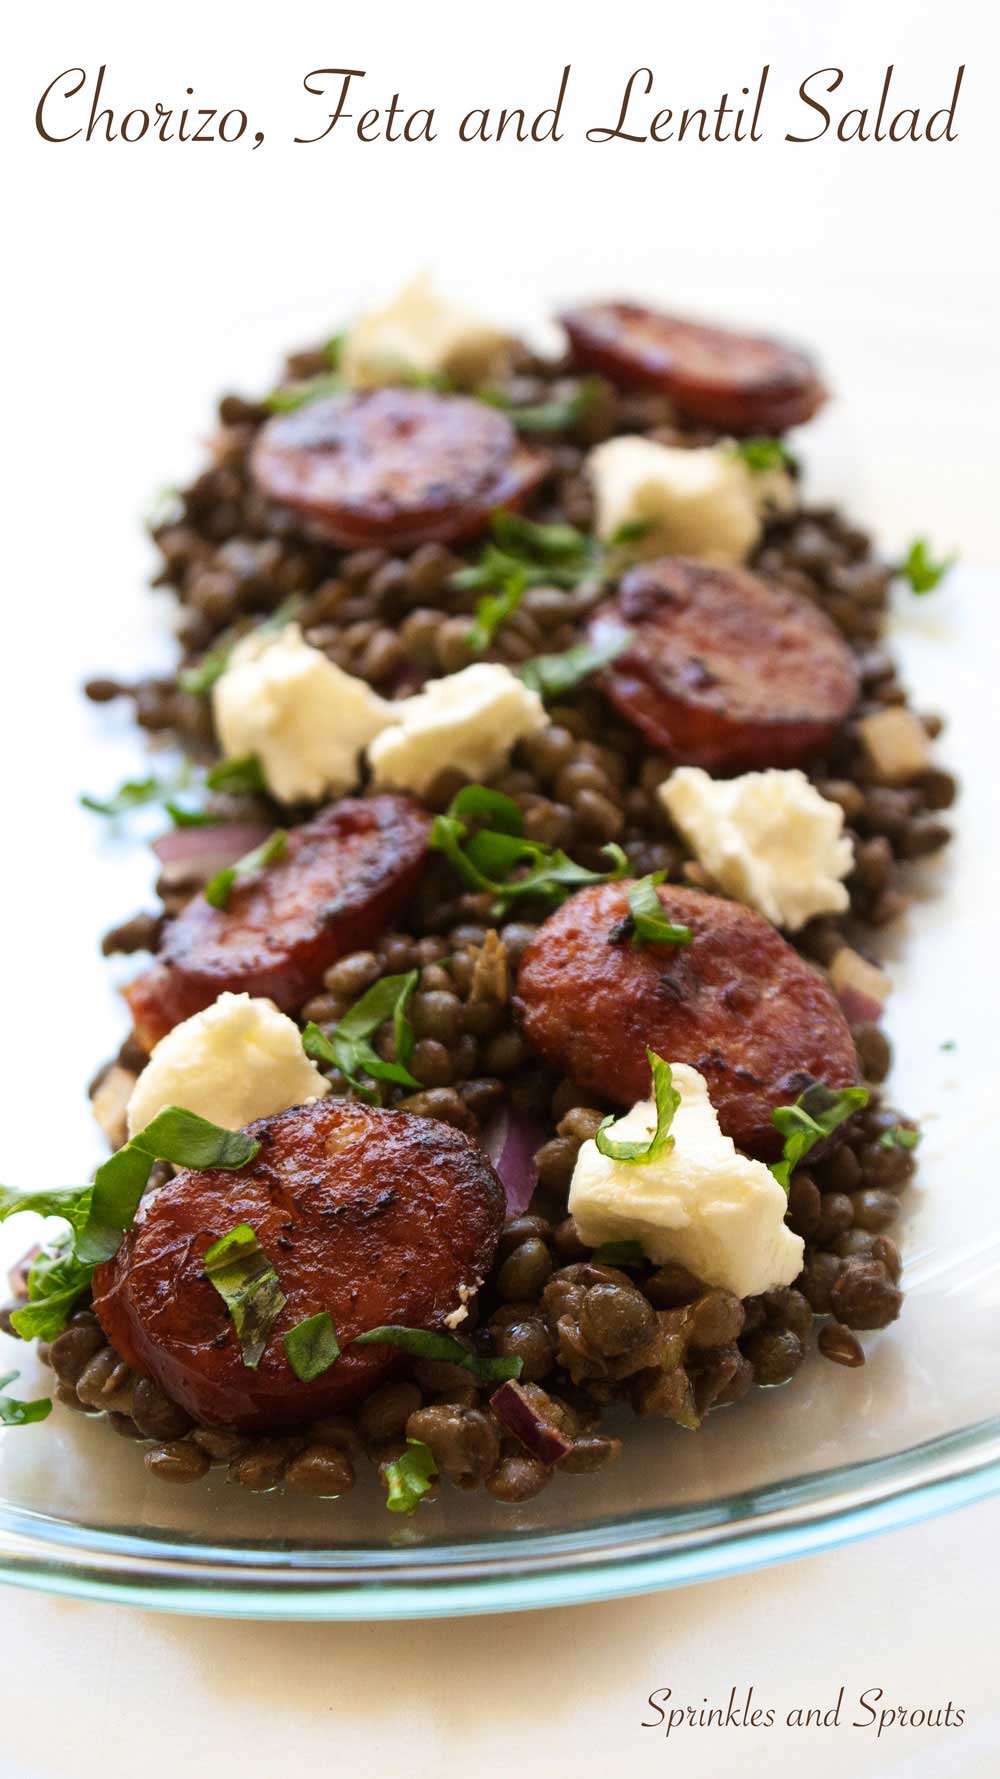 Chorizo, Feta and Lentil Salad. Creamy puy lentils in a light dressing served with salty soft feta and crispy hot chorizo. A great gluten free recipe.